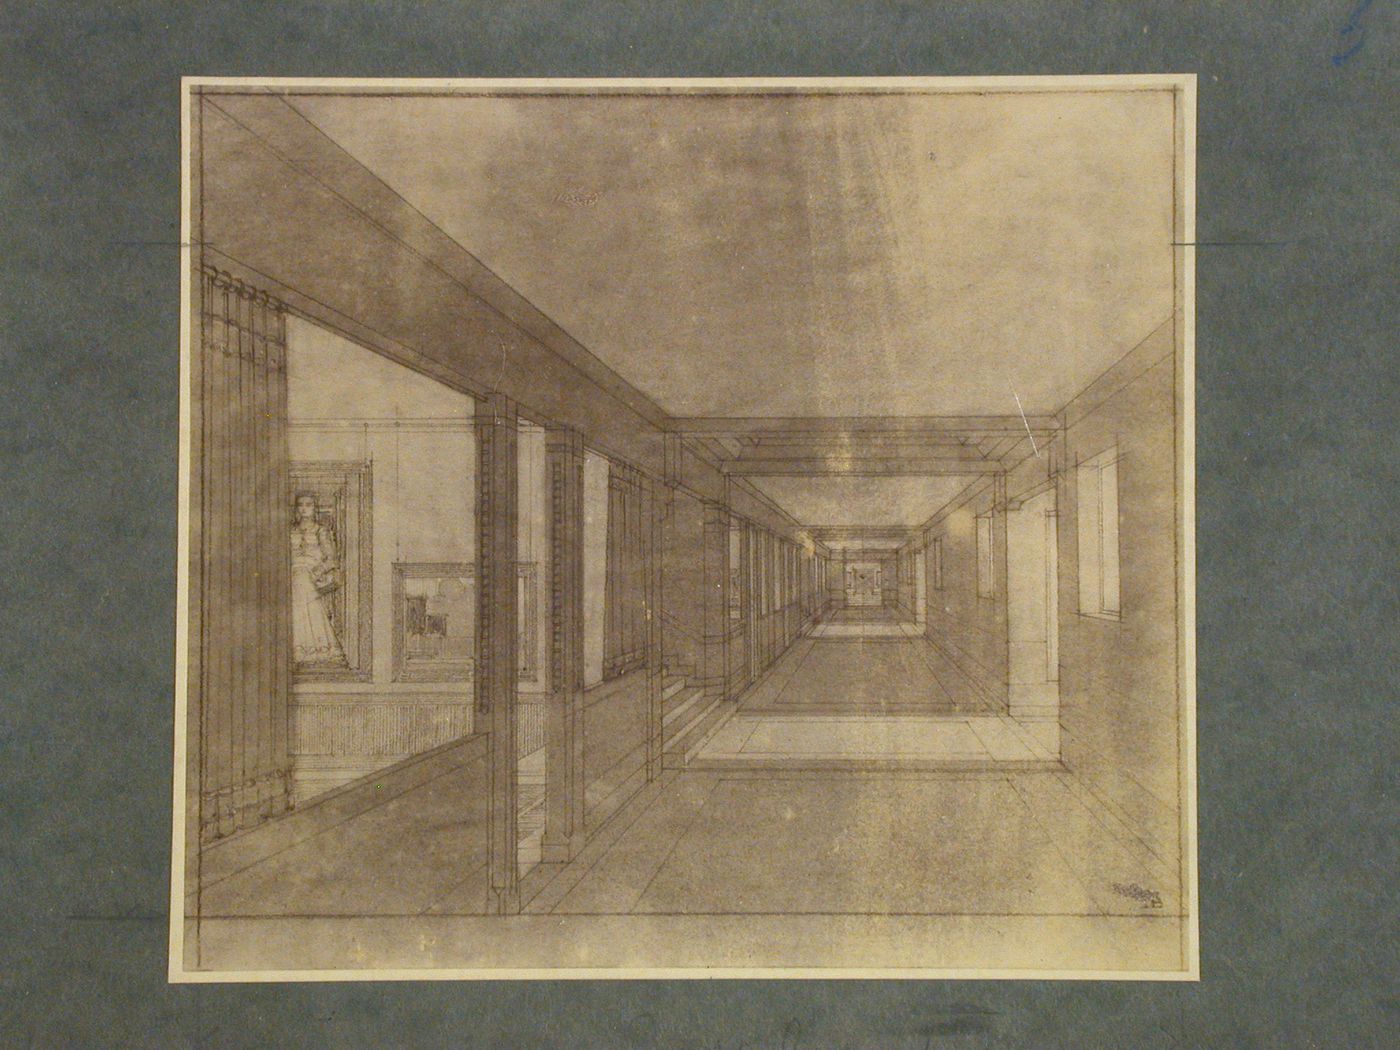 Photograph of a rendering for a corridor and exhibition rooms of the Gemeente Museum [Public Museum], Stadhouderslaan 41, The Hague, Netherlands